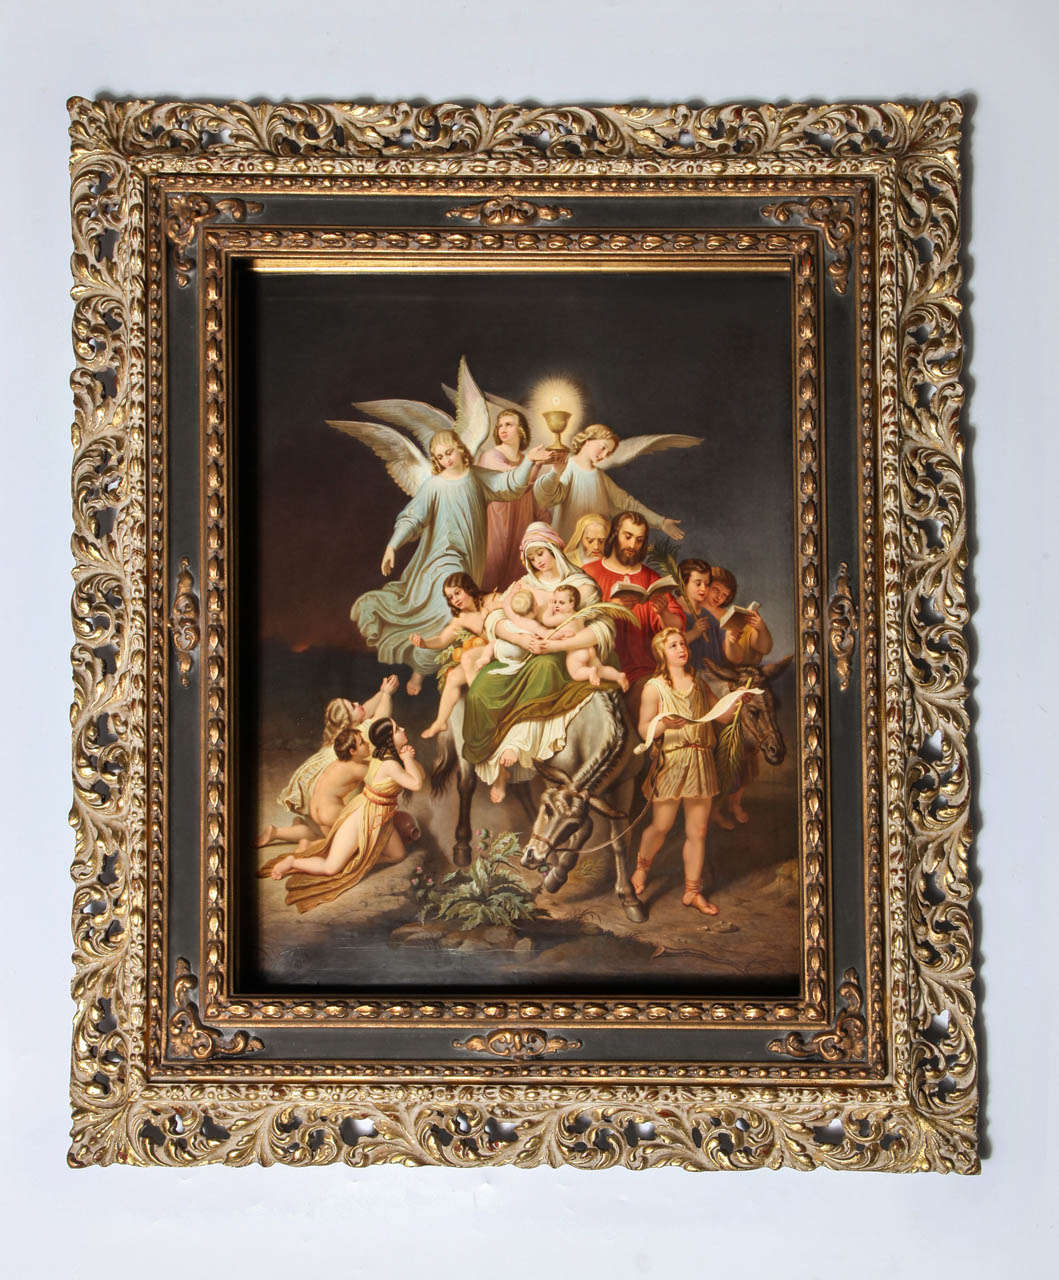 A huge KPM  [KONIIGLICHE PORZERLLAN - MANUFAKUR] Plaque of 'The flight into Egypt' is superbly painted with the finest quality glaze. KPM's creation of fine porcelain plaques with fabulous works of art is one of the glories of European porcelain